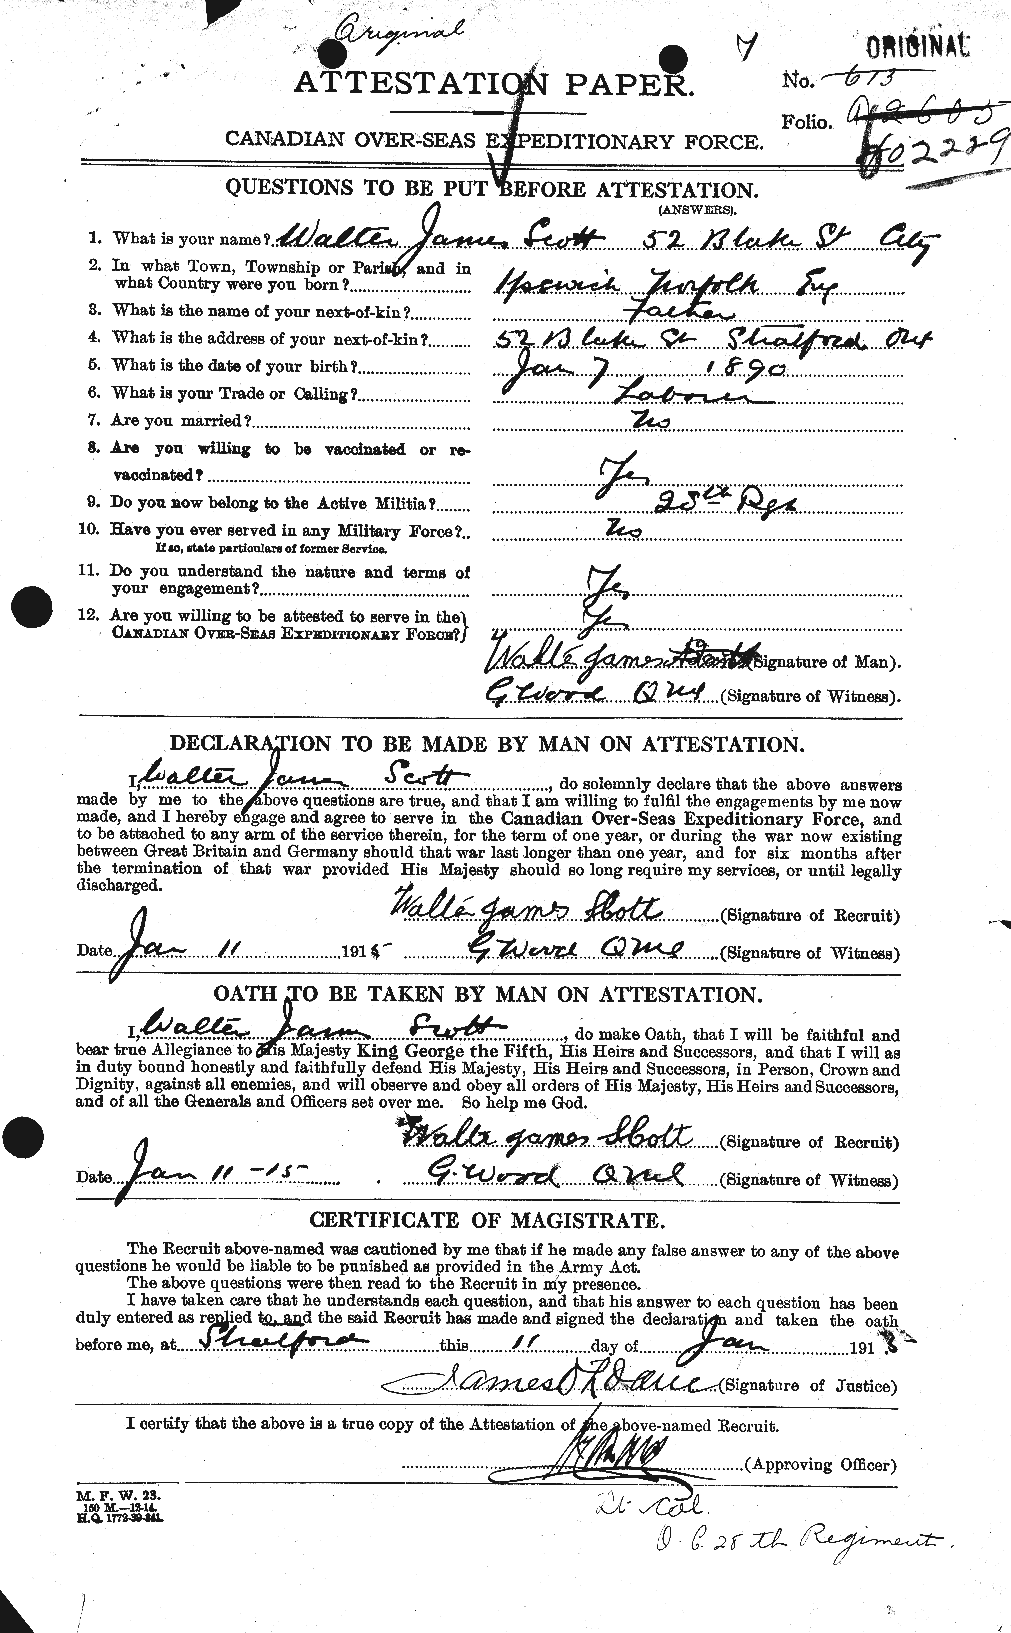 Personnel Records of the First World War - CEF 087979a